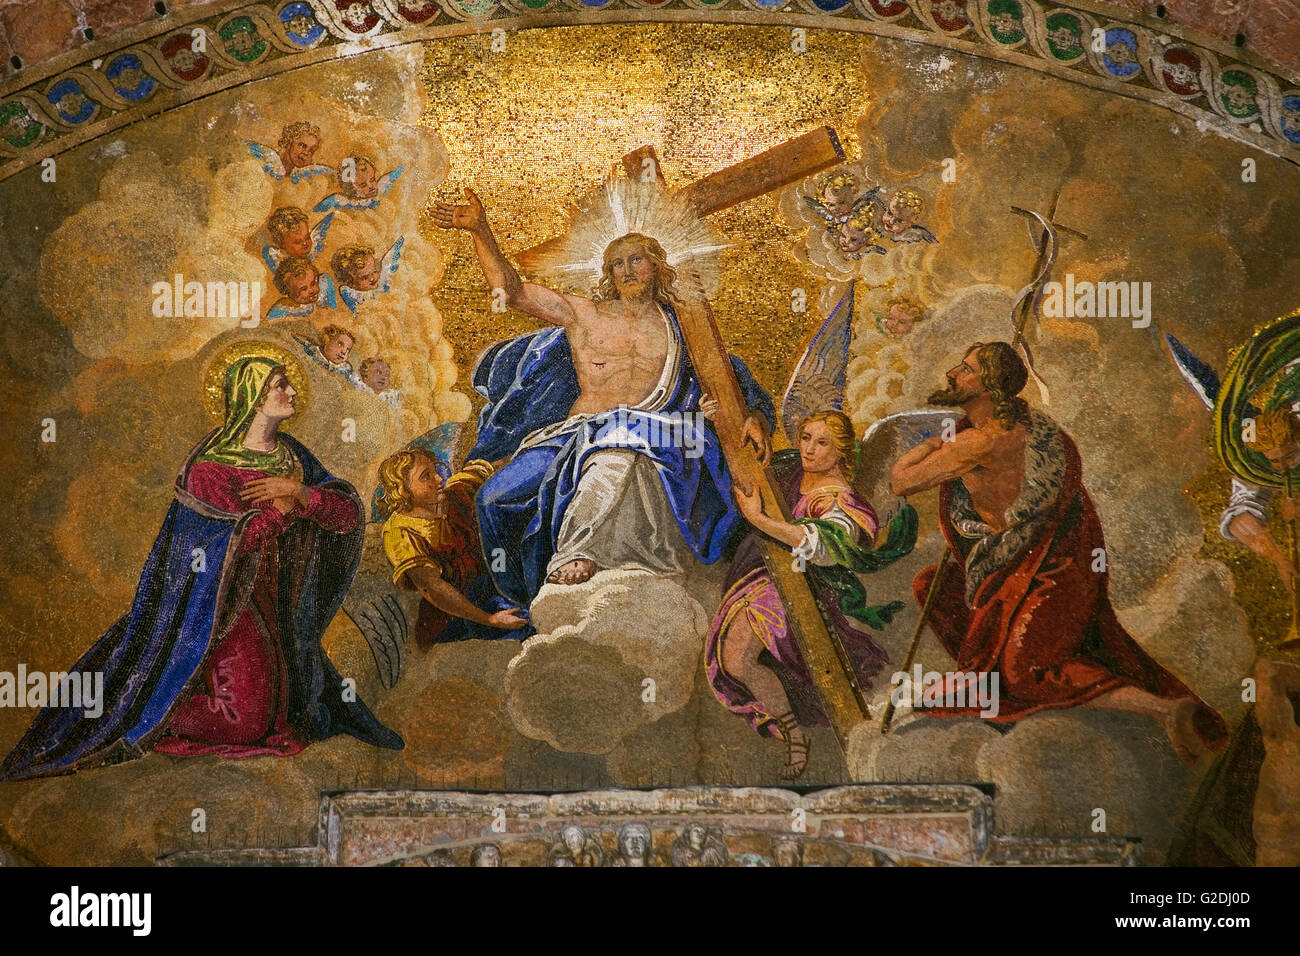 Close-up of the beautiful mosaic of 'The Last Judgement' above the main entrance to the Basilica di San Marco, Venice, Italy Stock Photo